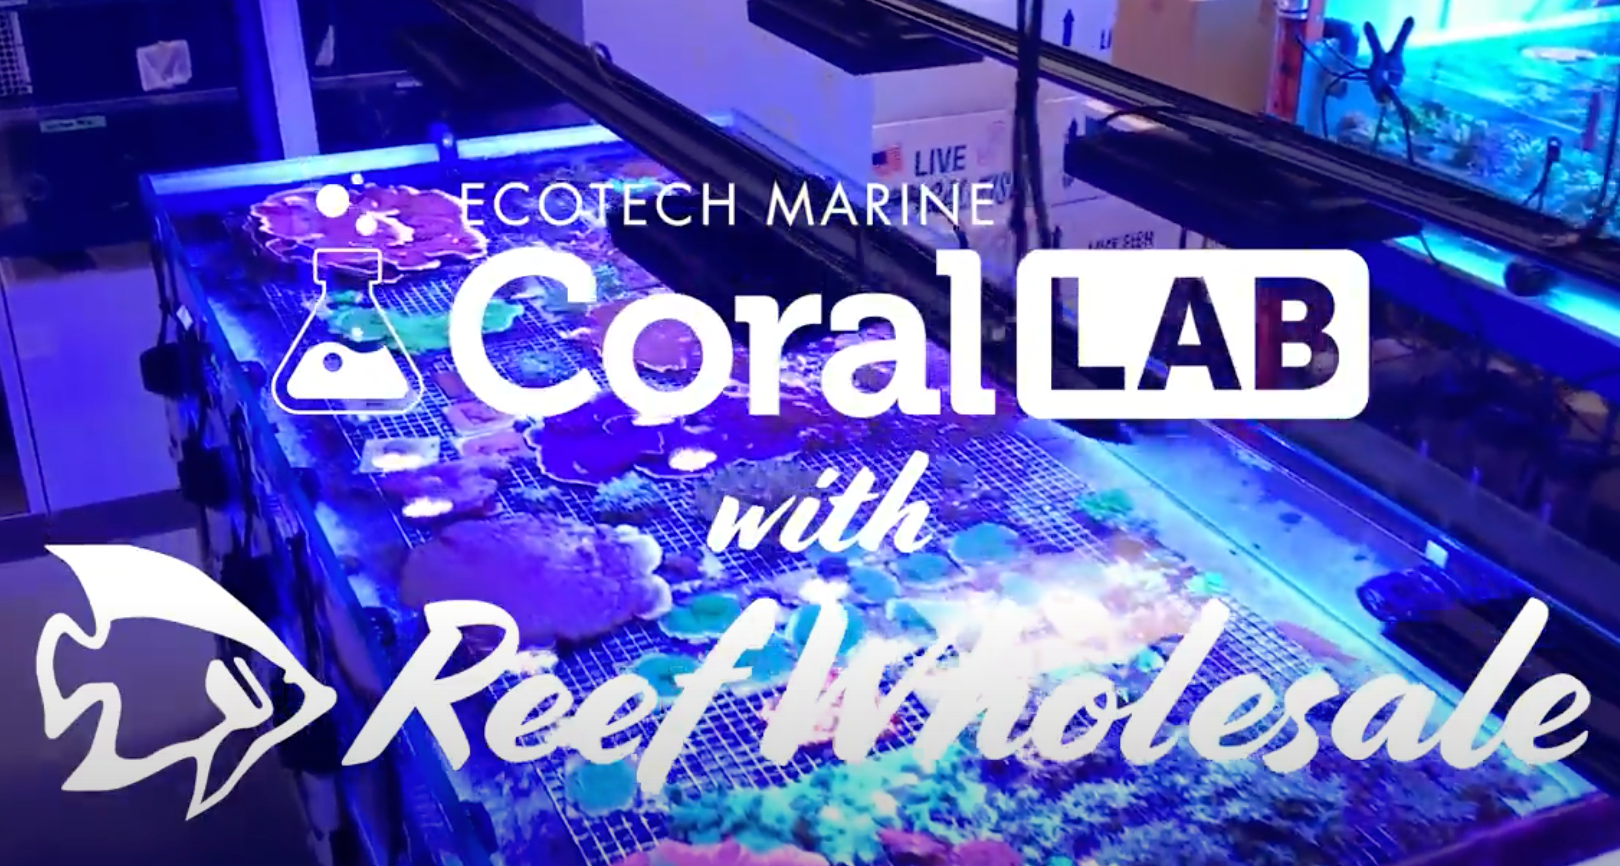 CoralLab and ReefWholesale Dosing in the DLI System